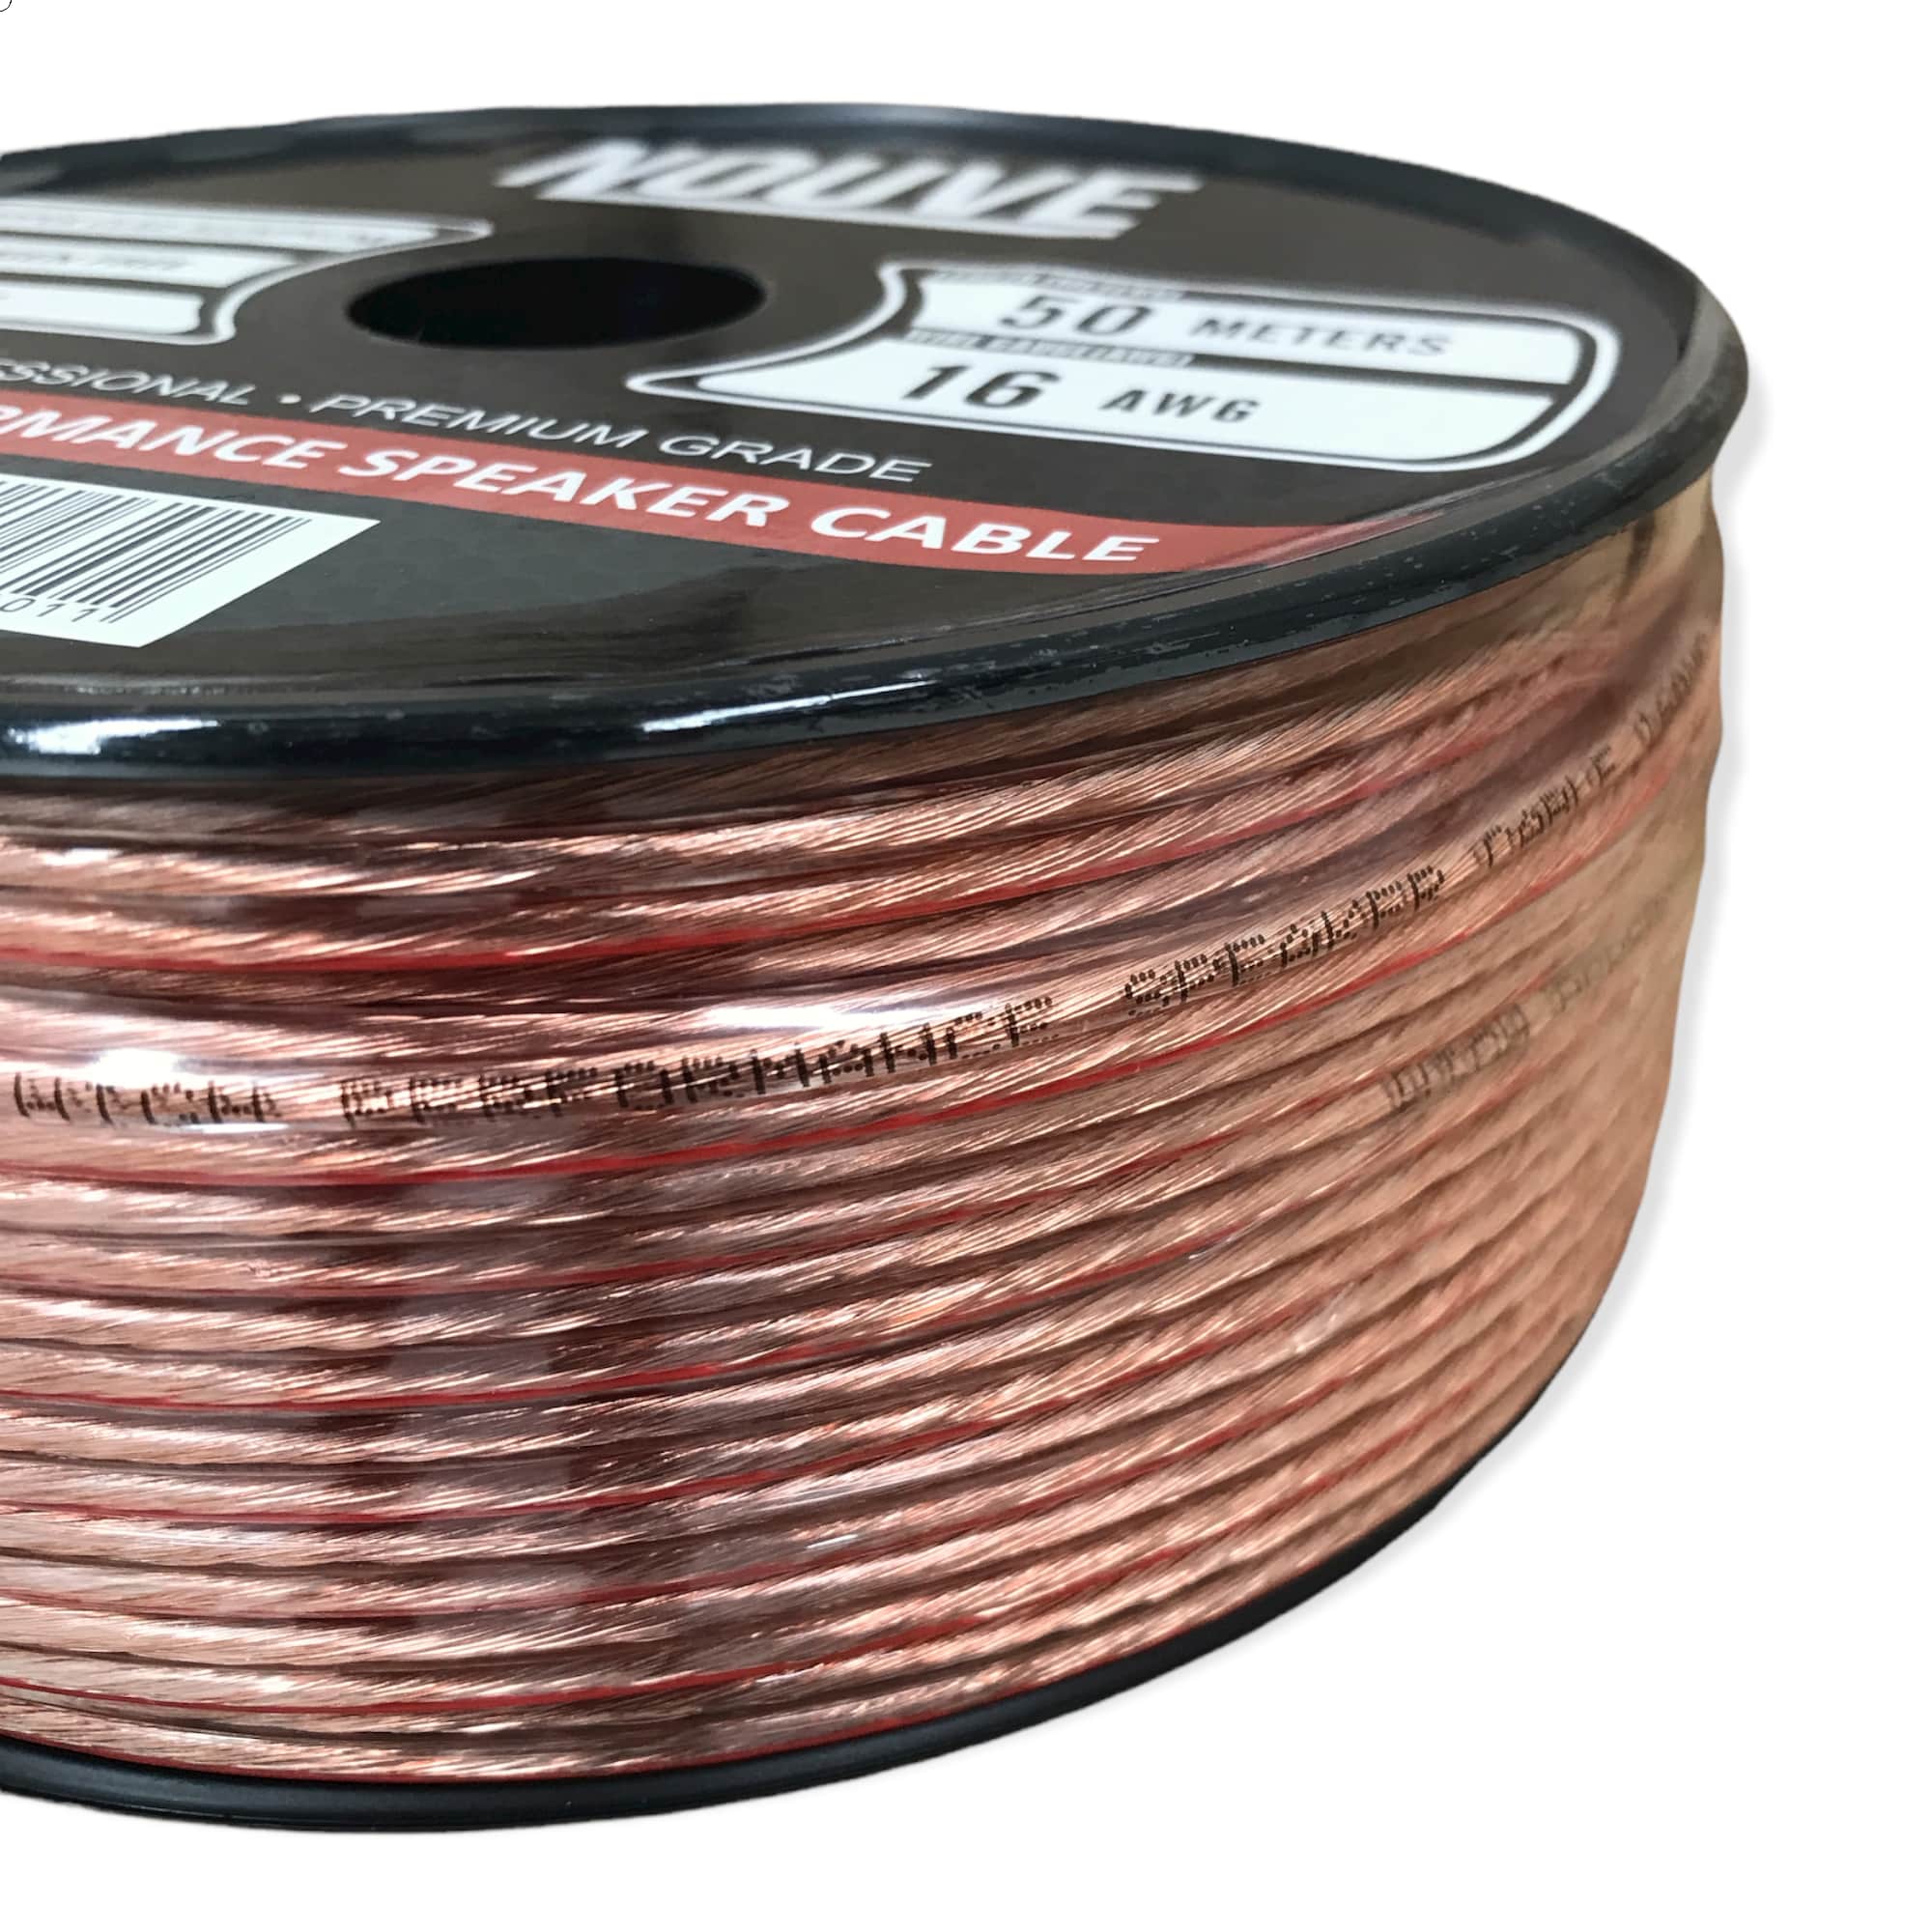 16 awg speaker cable 50m cca high performance